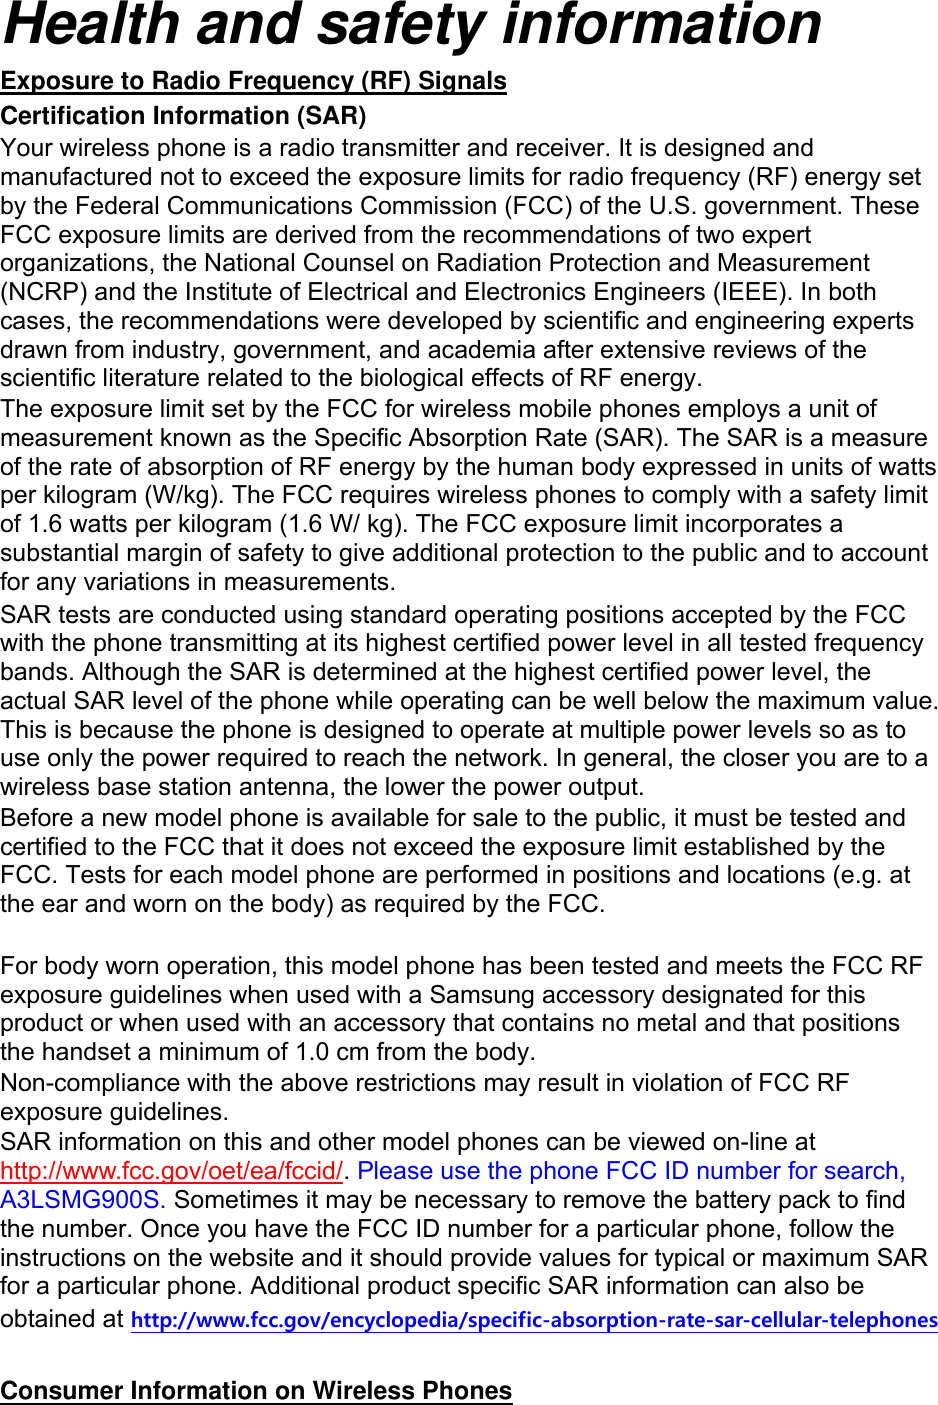 Health and safety information Exposure to Radio Frequency (RF) Signals Certification Information (SAR) Your wireless phone is a radio transmitter and receiver. It is designed and manufactured not to exceed the exposure limits for radio frequency (RF) energy set by the Federal Communications Commission (FCC) of the U.S. government. These FCC exposure limits are derived from the recommendations of two expert organizations, the National Counsel on Radiation Protection and Measurement (NCRP) and the Institute of Electrical and Electronics Engineers (IEEE). In both cases, the recommendations were developed by scientific and engineering experts drawn from industry, government, and academia after extensive reviews of the scientific literature related to the biological effects of RF energy. The exposure limit set by the FCC for wireless mobile phones employs a unit of measurement known as the Specific Absorption Rate (SAR). The SAR is a measure of the rate of absorption of RF energy by the human body expressed in units of watts per kilogram (W/kg). The FCC requires wireless phones to comply with a safety limit of 1.6 watts per kilogram (1.6 W/ kg). The FCC exposure limit incorporates a substantial margin of safety to give additional protection to the public and to account for any variations in measurements. SAR tests are conducted using standard operating positions accepted by the FCC with the phone transmitting at its highest certified power level in all tested frequency bands. Although the SAR is determined at the highest certified power level, the actual SAR level of the phone while operating can be well below the maximum value. This is because the phone is designed to operate at multiple power levels so as to use only the power required to reach the network. In general, the closer you are to a wireless base station antenna, the lower the power output. Before a new model phone is available for sale to the public, it must be tested and certified to the FCC that it does not exceed the exposure limit established by the FCC. Tests for each model phone are performed in positions and locations (e.g. at the ear and worn on the body) as required by the FCC.      For body worn operation, this model phone has been tested and meets the FCC RF exposure guidelines when used with a Samsung accessory designated for this product or when used with an accessory that contains no metal and that positions the handset a minimum of 1.0 cm from the body.   Non-compliance with the above restrictions may result in violation of FCC RF exposure guidelines. SAR information on this and other model phones can be viewed on-line at http://www.fcc.gov/oet/ea/fccid/. Please use the phone FCC ID number for search, A3LSMG900S. Sometimes it may be necessary to remove the battery pack to find the number. Once you have the FCC ID number for a particular phone, follow the instructions on the website and it should provide values for typical or maximum SAR for a particular phone. Additional product specific SAR information can also be obtained at http://www.fcc.gov/encyclopedia/specific-absorption-rate-sar-cellular-telephones  Consumer Information on Wireless Phones 